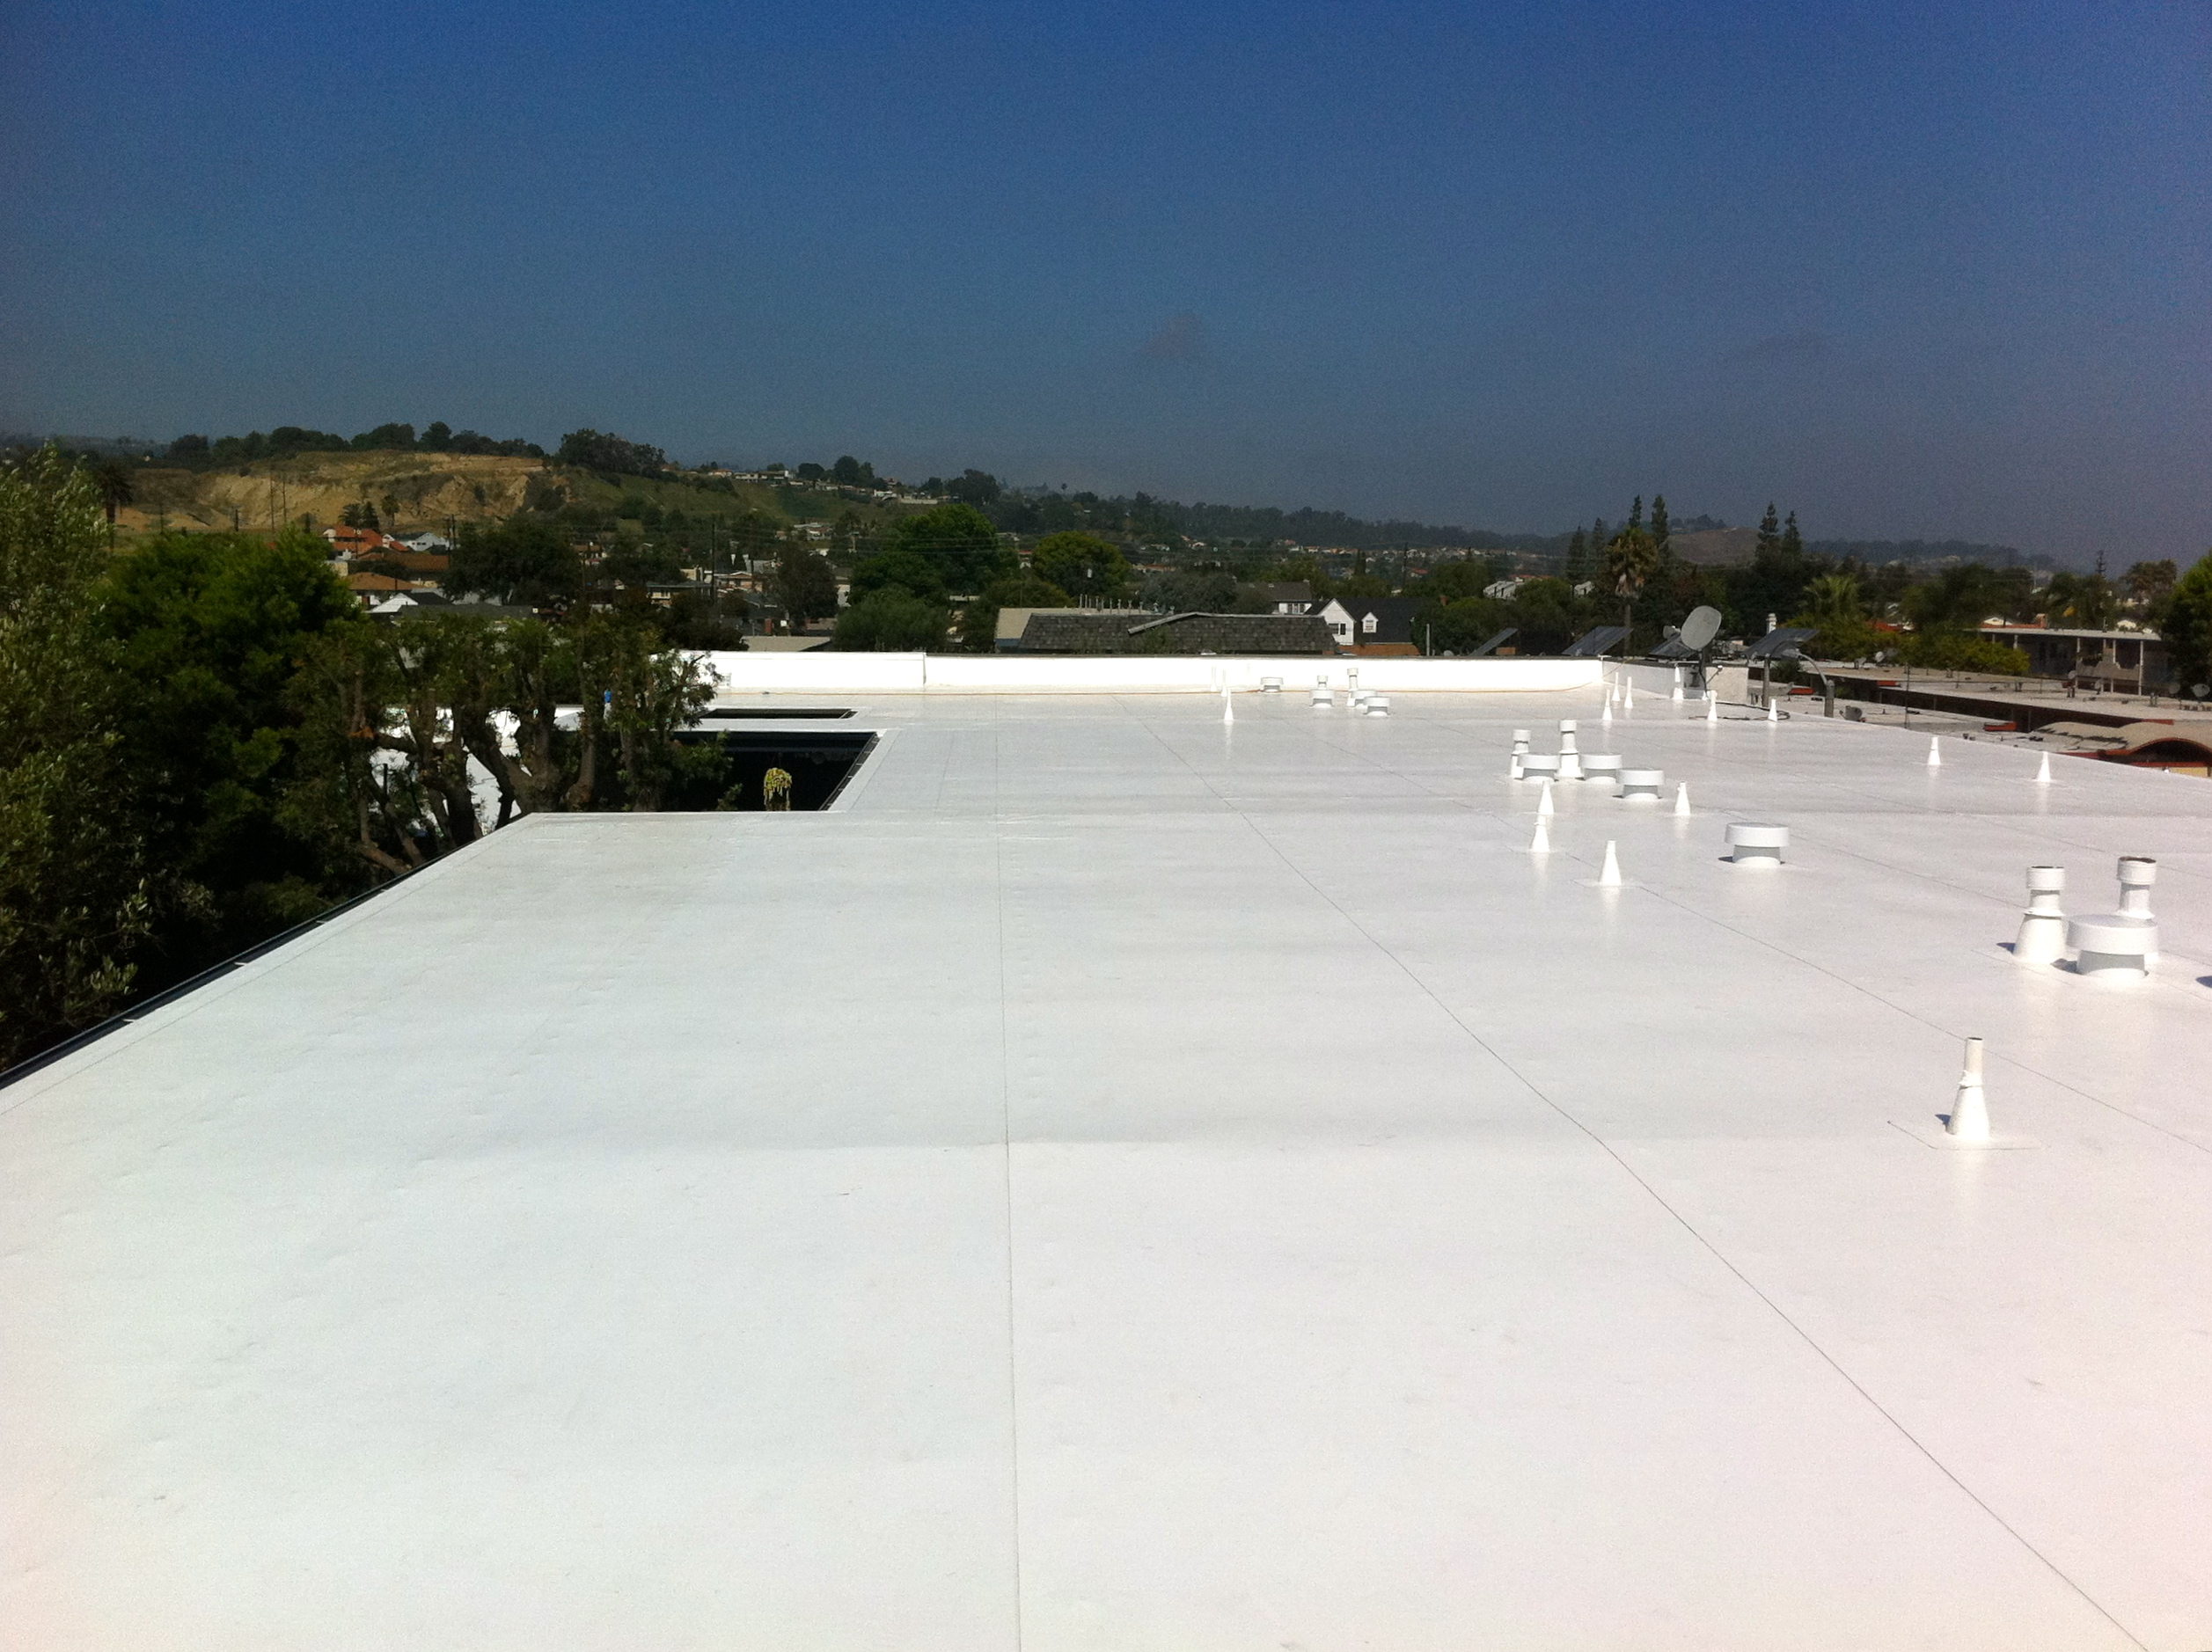 80 Mil IB Roof System installed by Chandler's Roofing on an HOA in Lomita, CA.